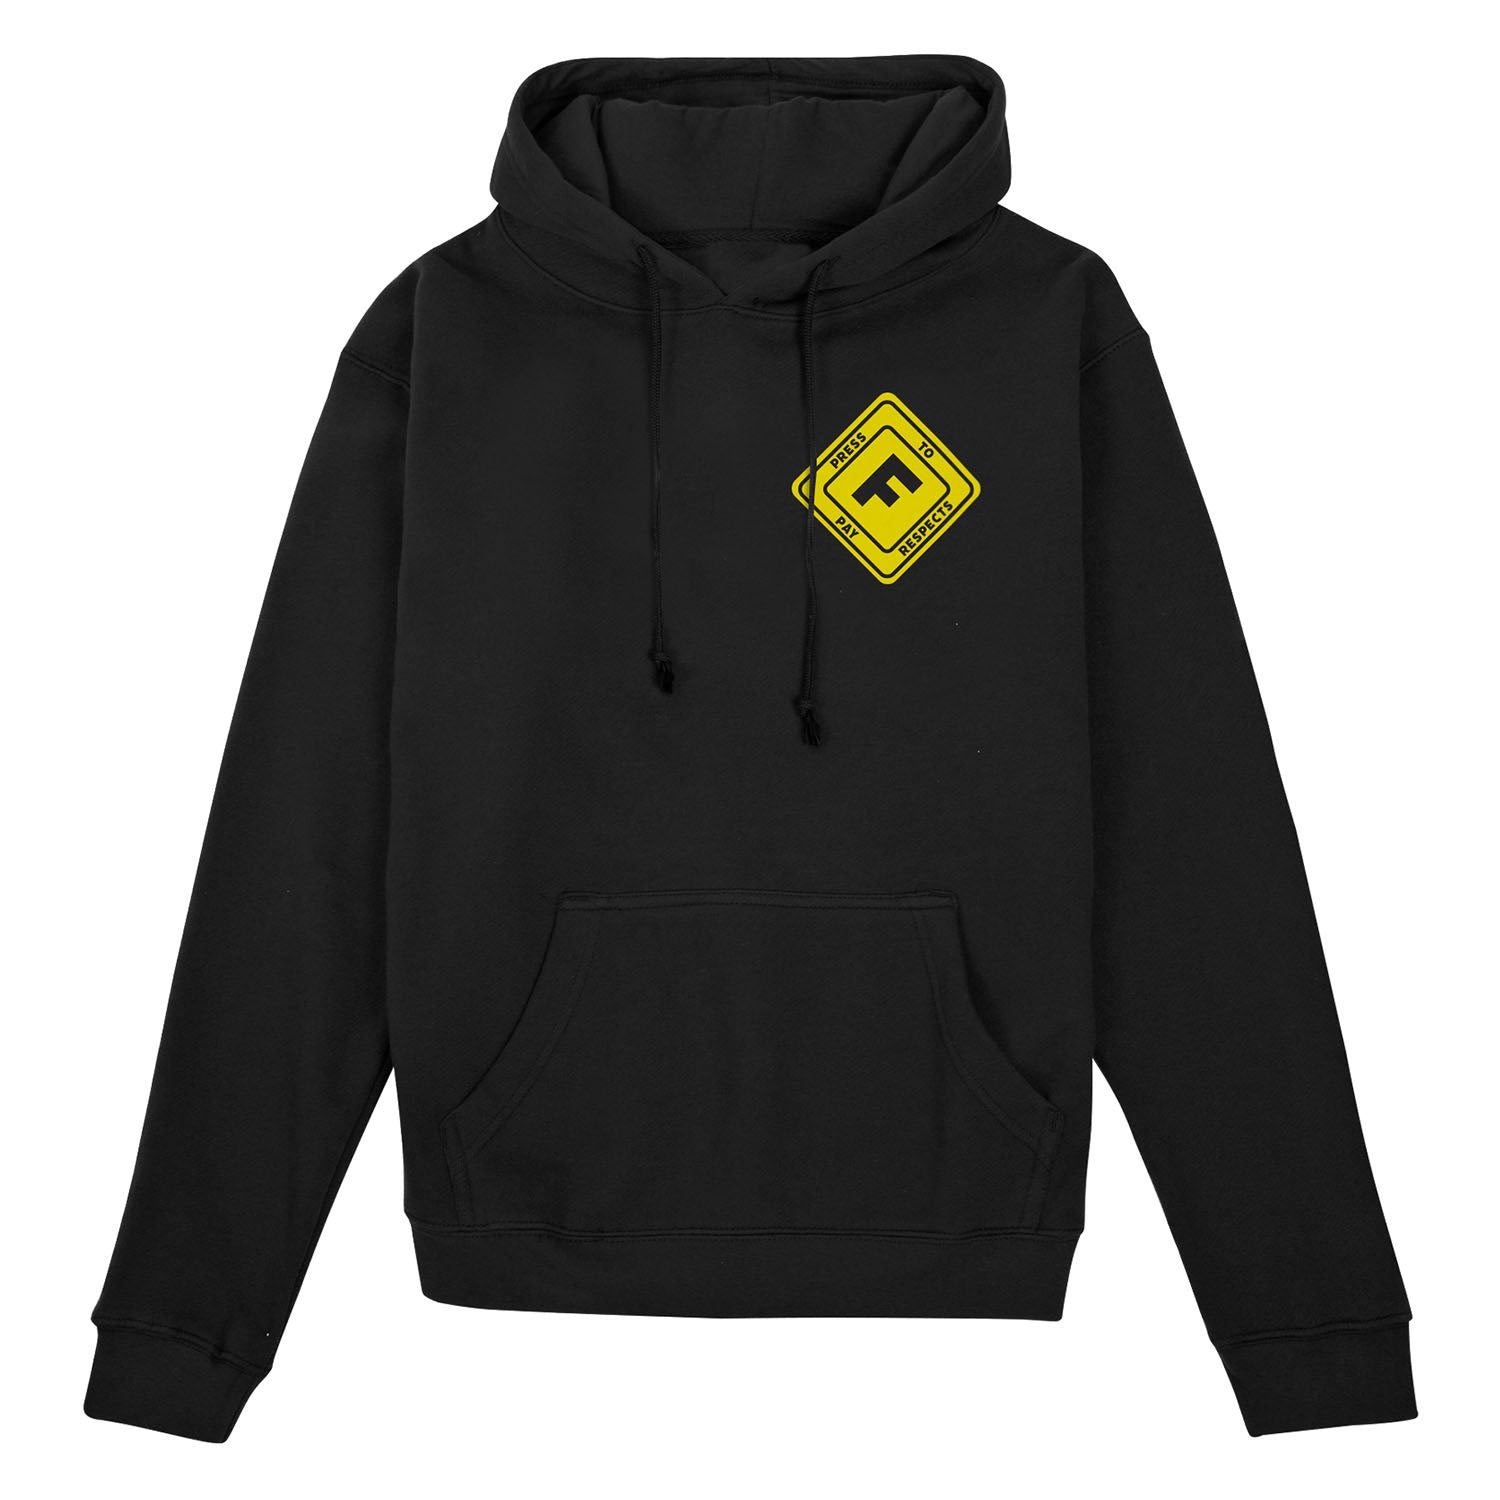 Call of Duty Black Press F Hoodie - Front View